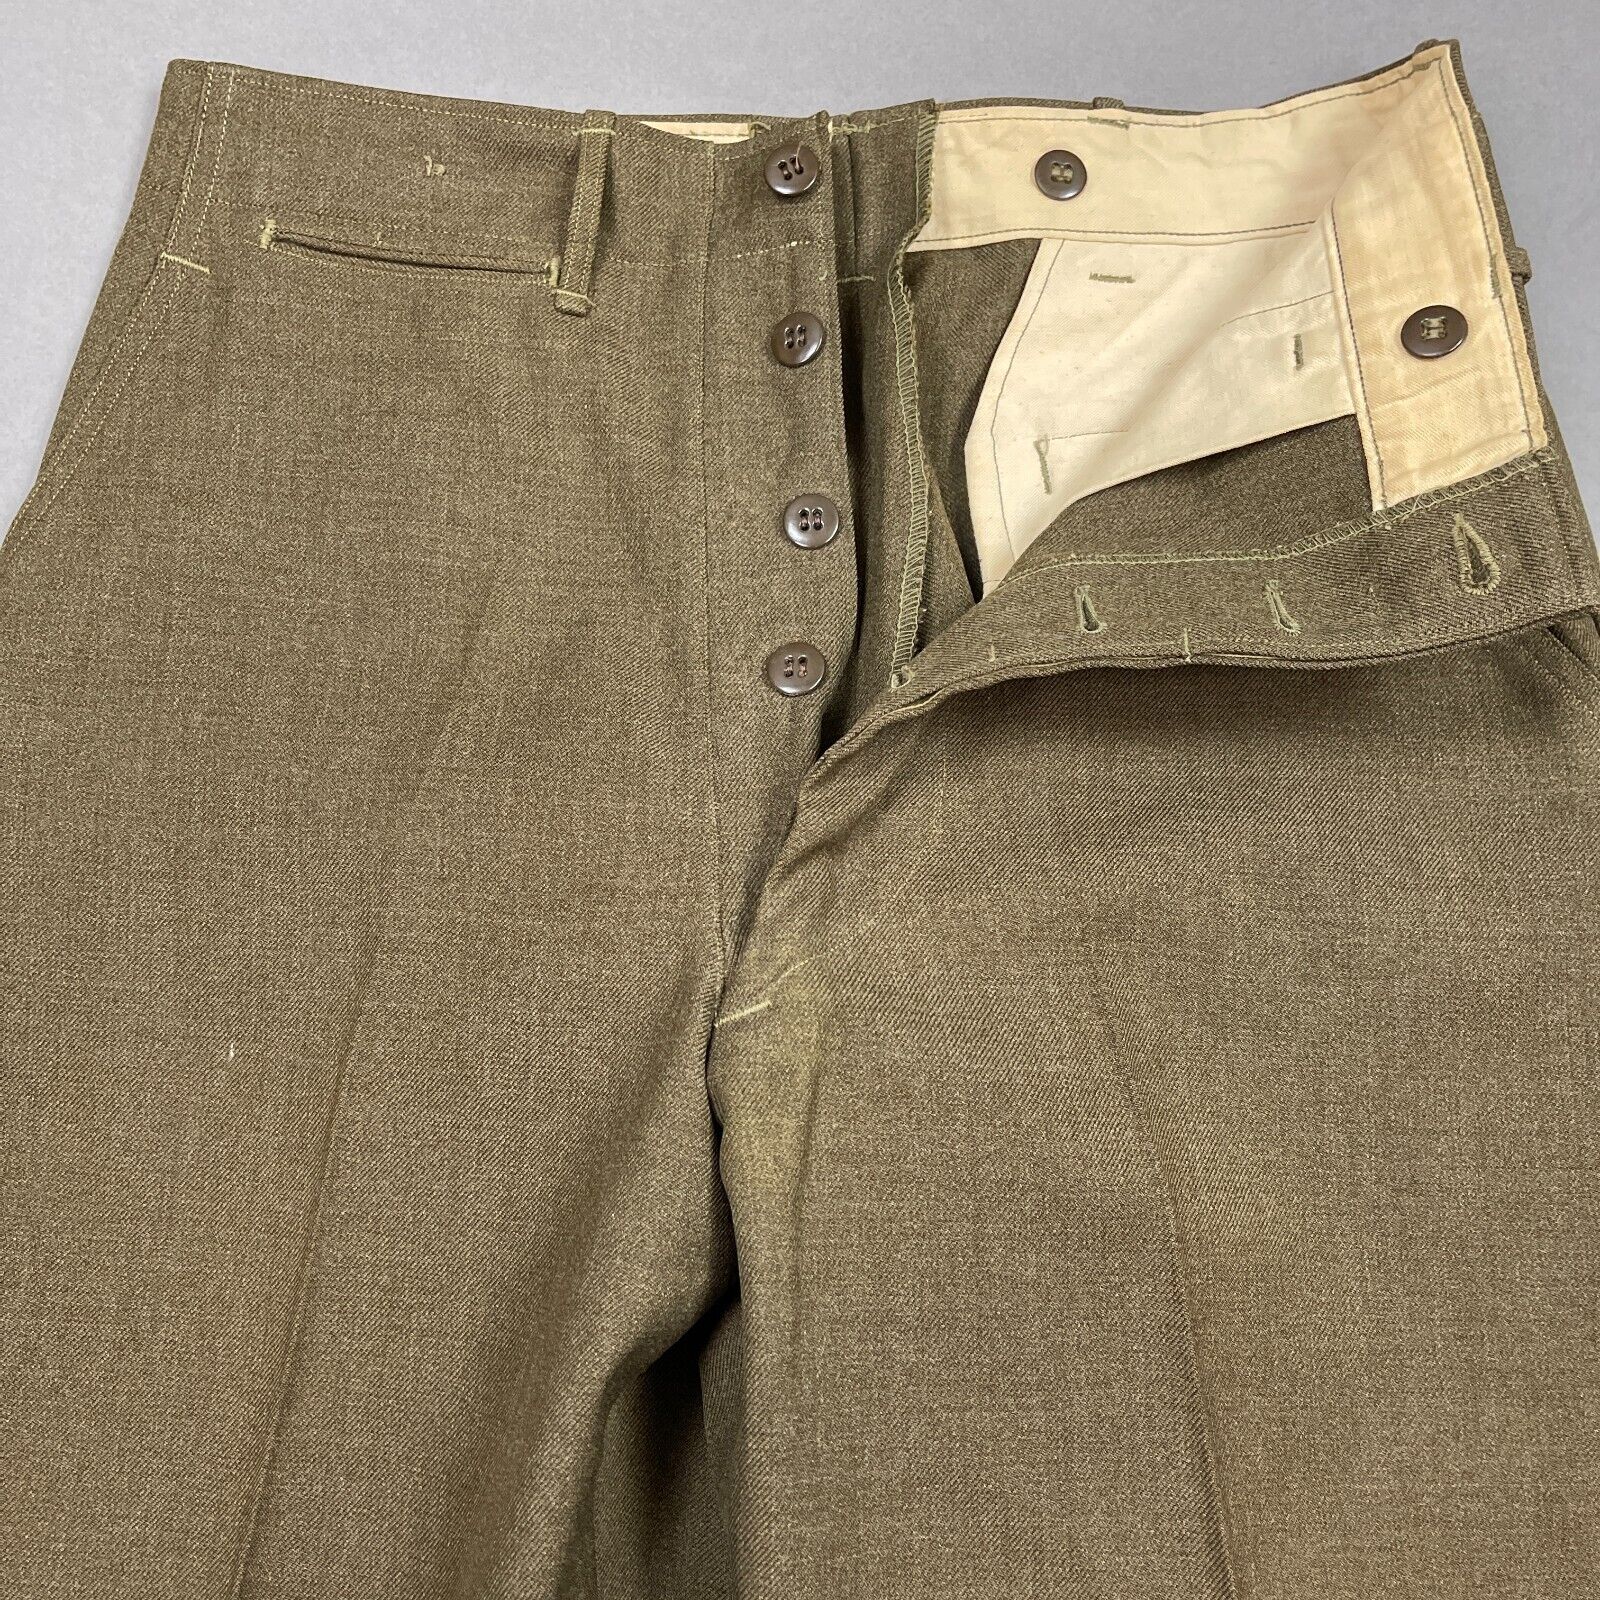 US Military Pants Mens 31x31 Green Wool Trouser Vintage Korea 55 T354 Button Fly